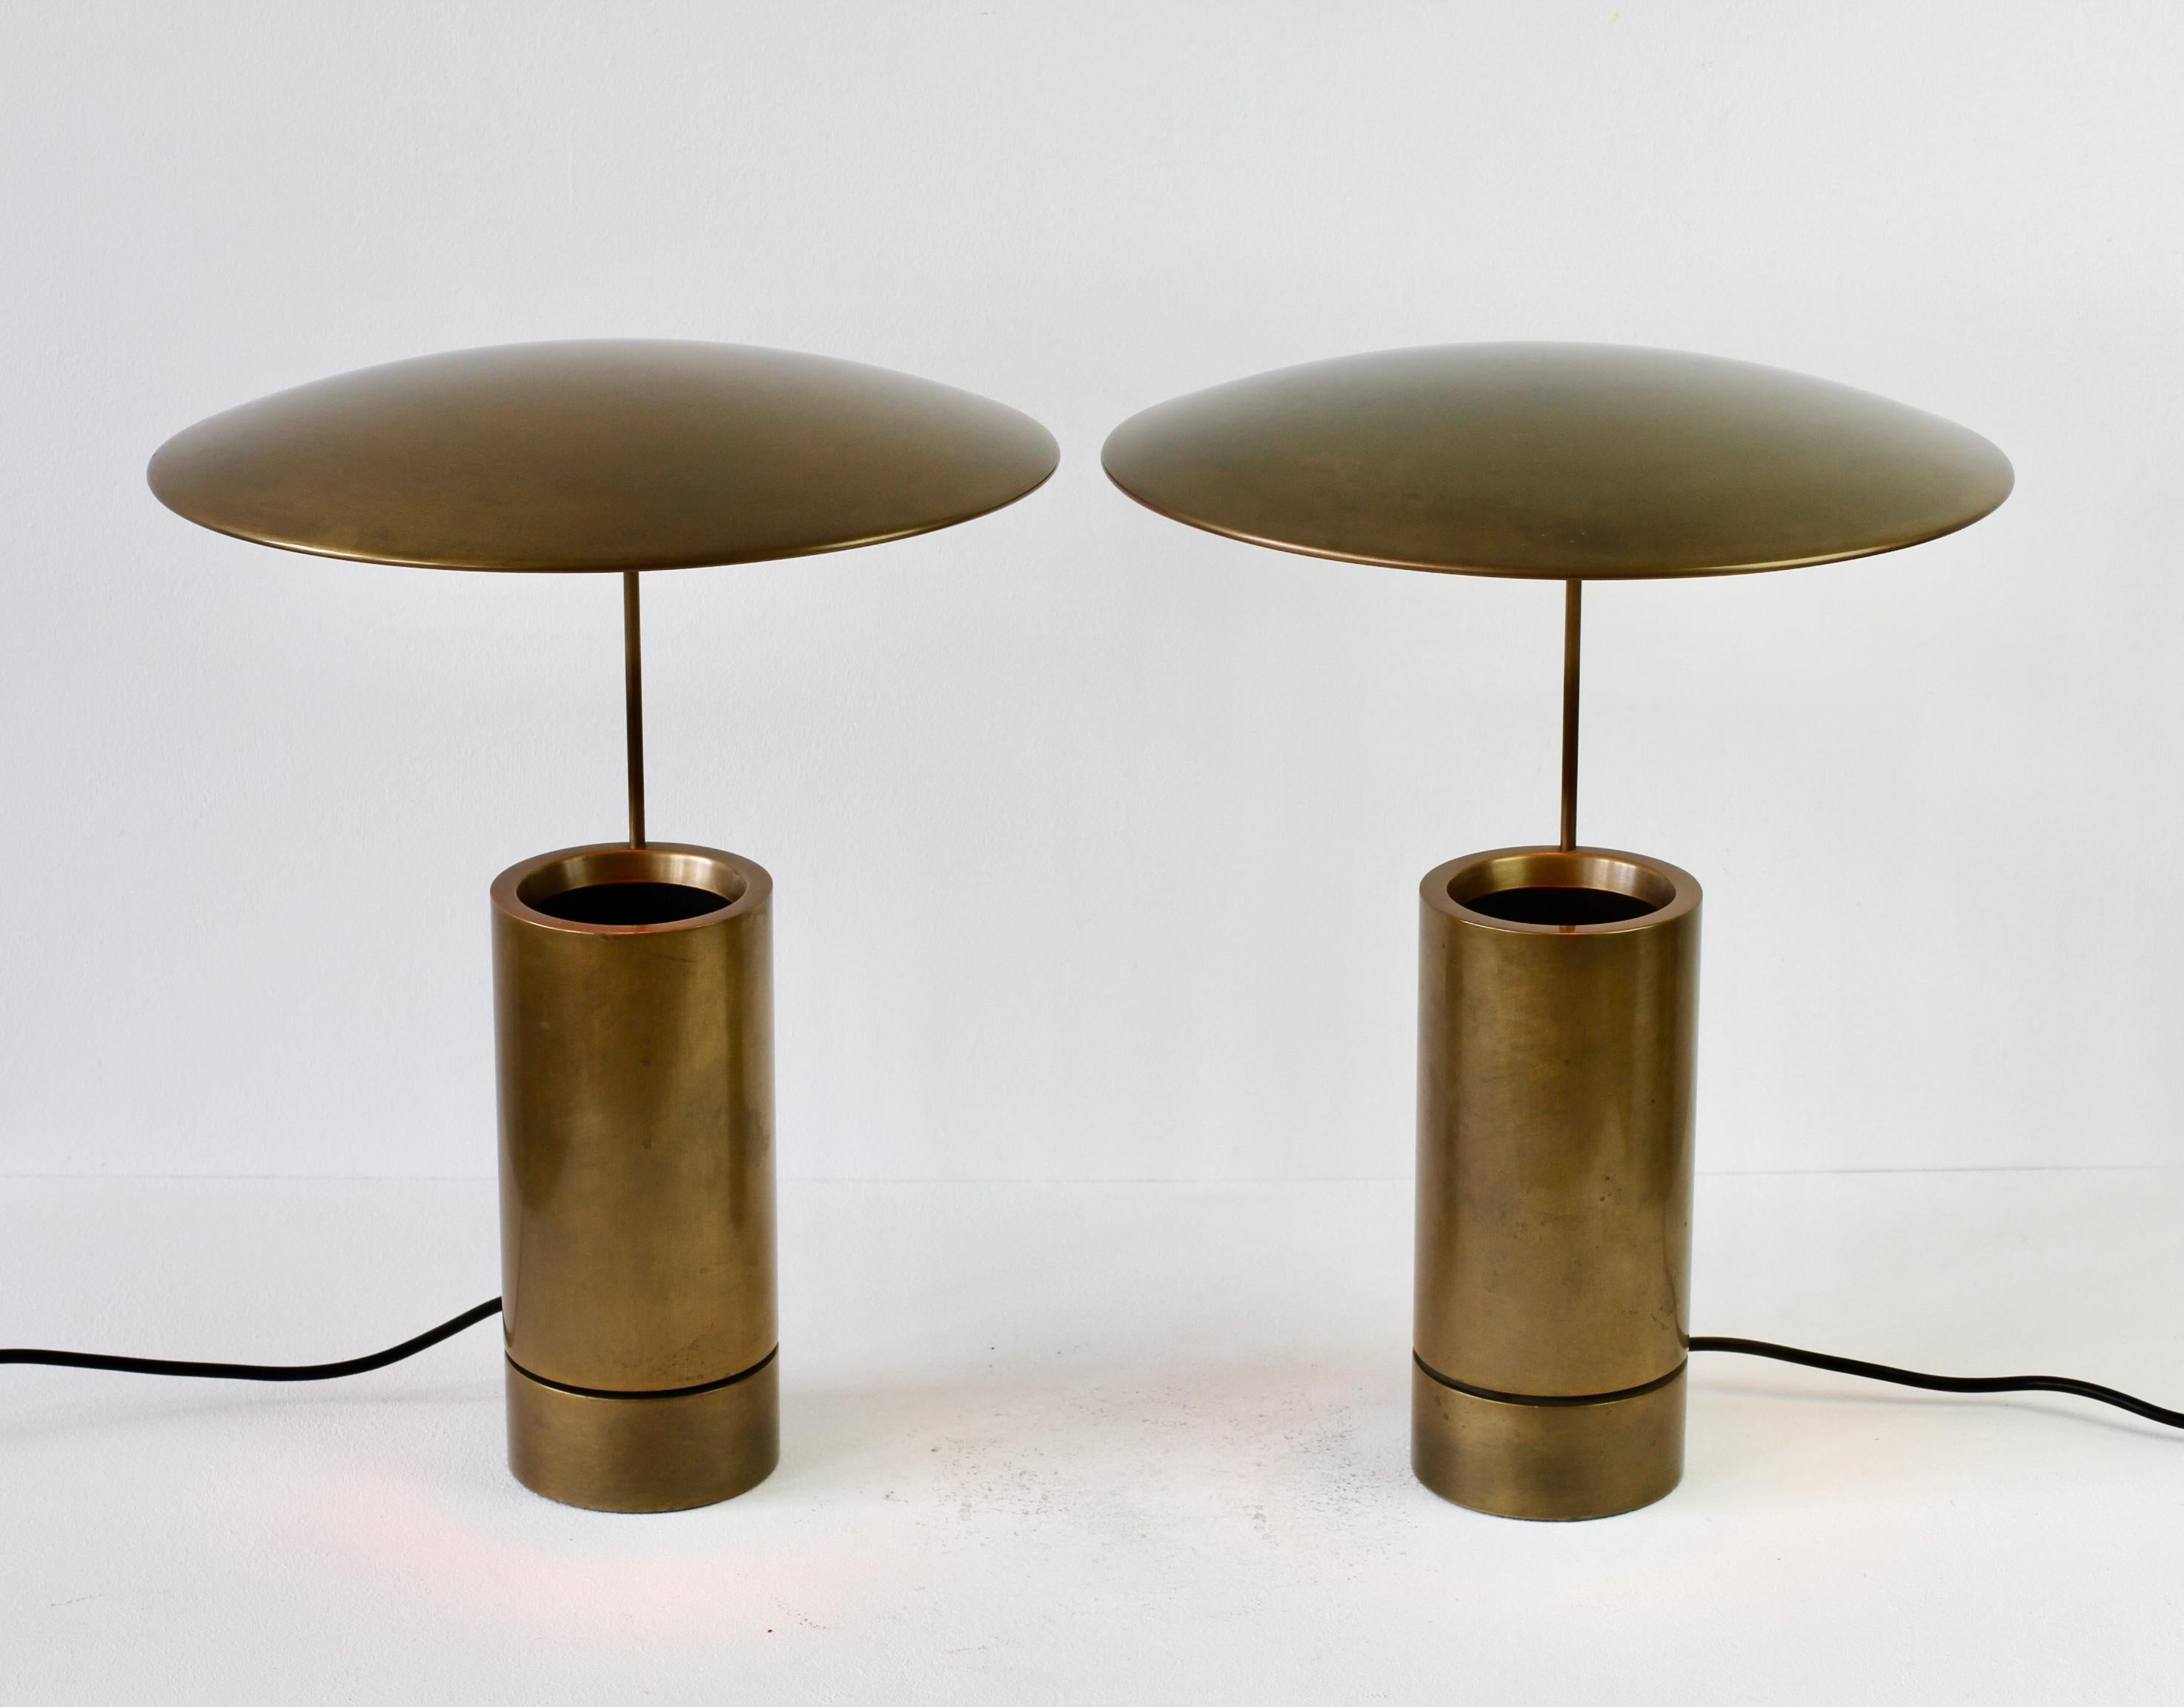 Incredibly rare and hard to come by pair of vintage Mid-Century Modern German made side table lamps or desk lights by Florian Schulz circa late 1980s - late 2000s. Featuring a matt brushed brass finish and ingeniously designed round adjustable